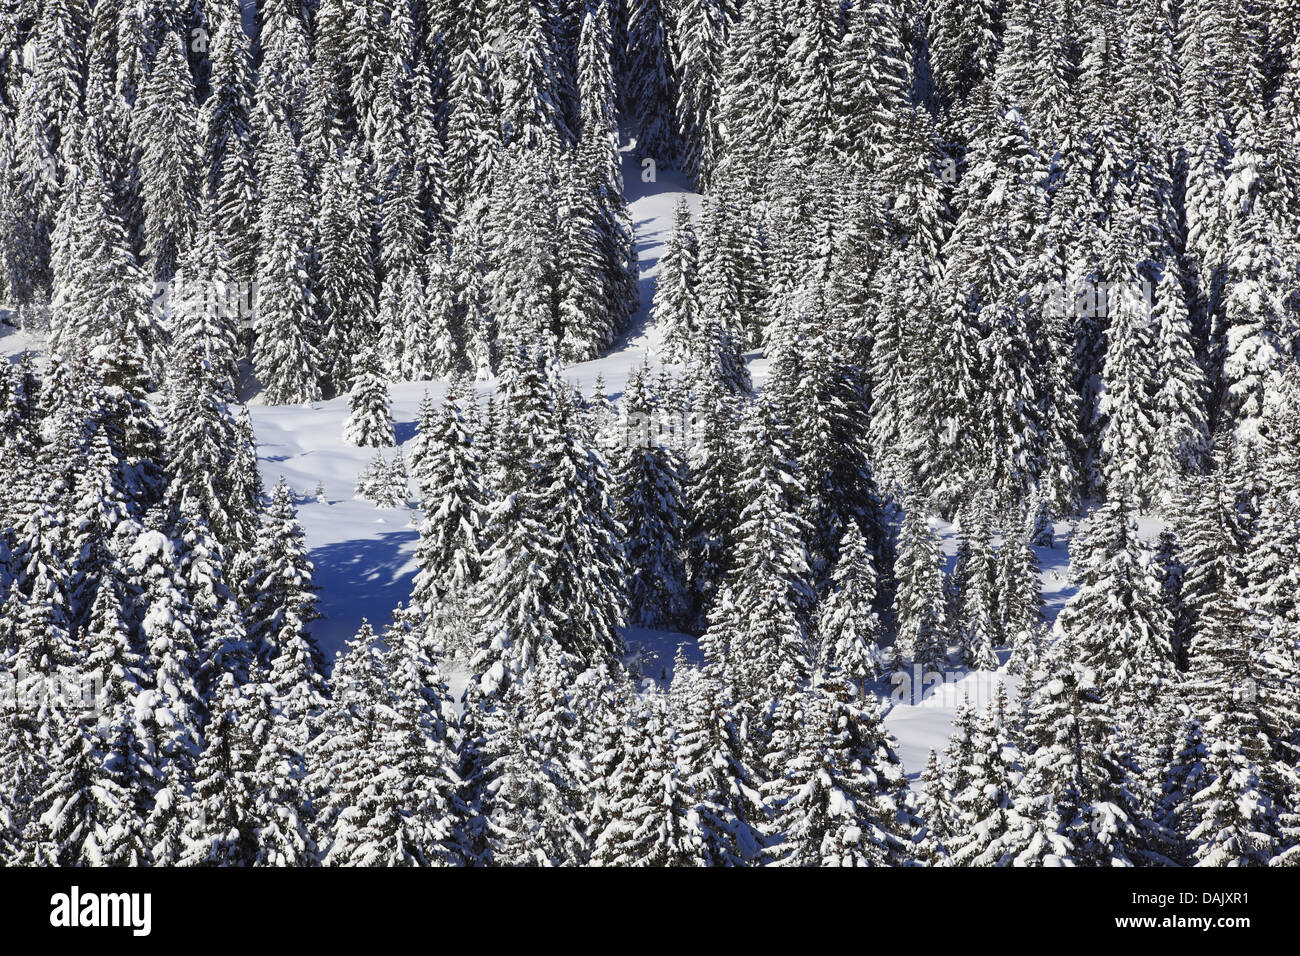 Norway spruce (Picea abies), view from above on a snow-covered forest, Switzerland Stock Photo